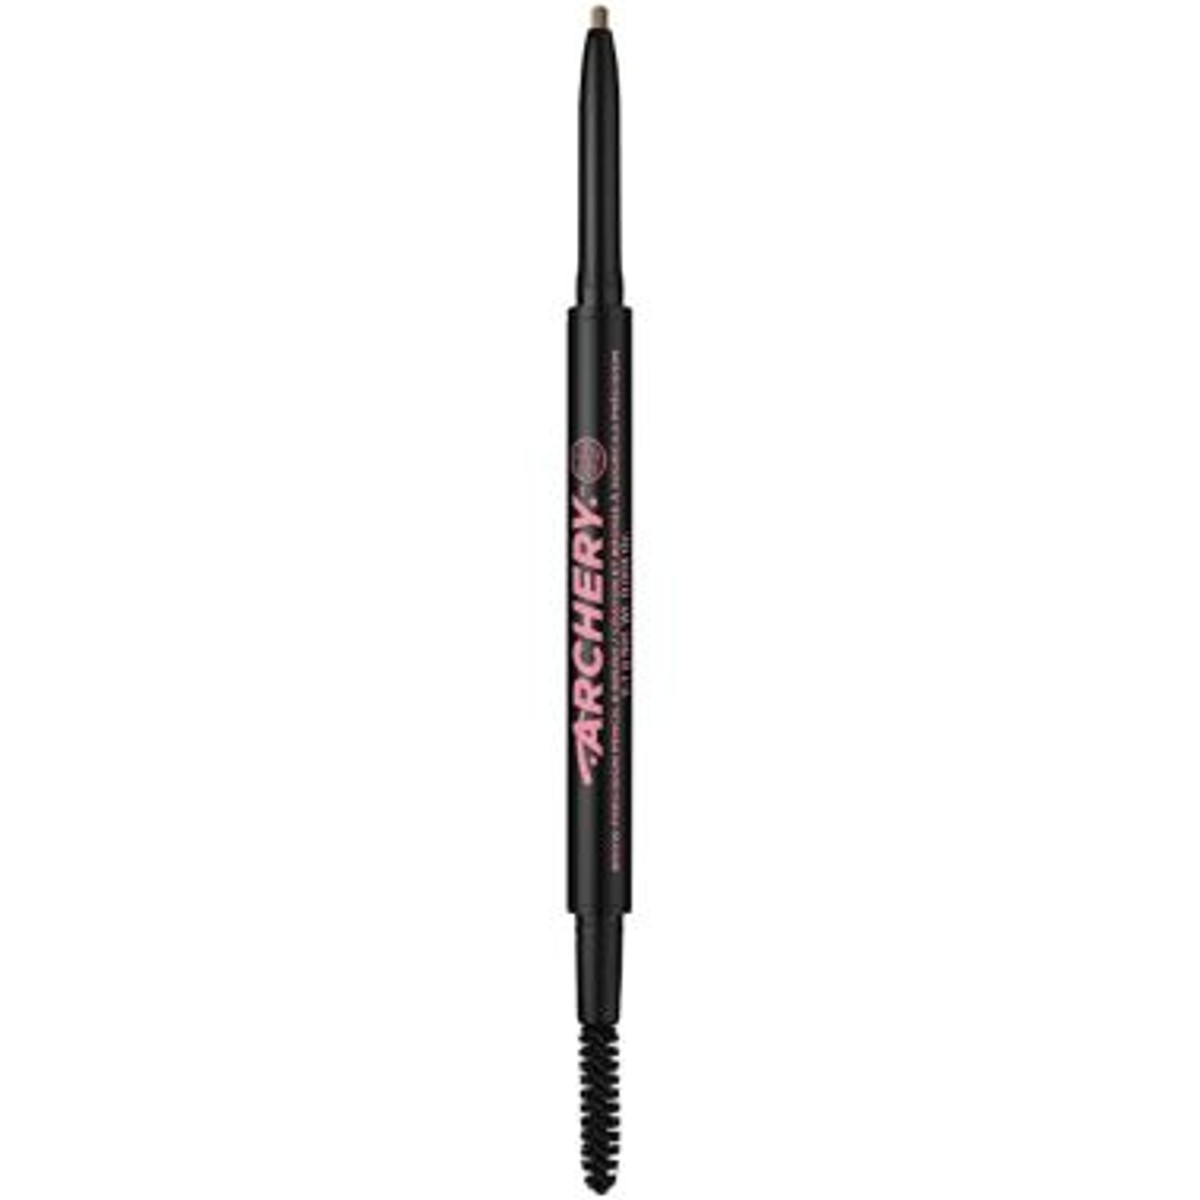 Archery 2-in-1 Eyebrow Pencil With Brush